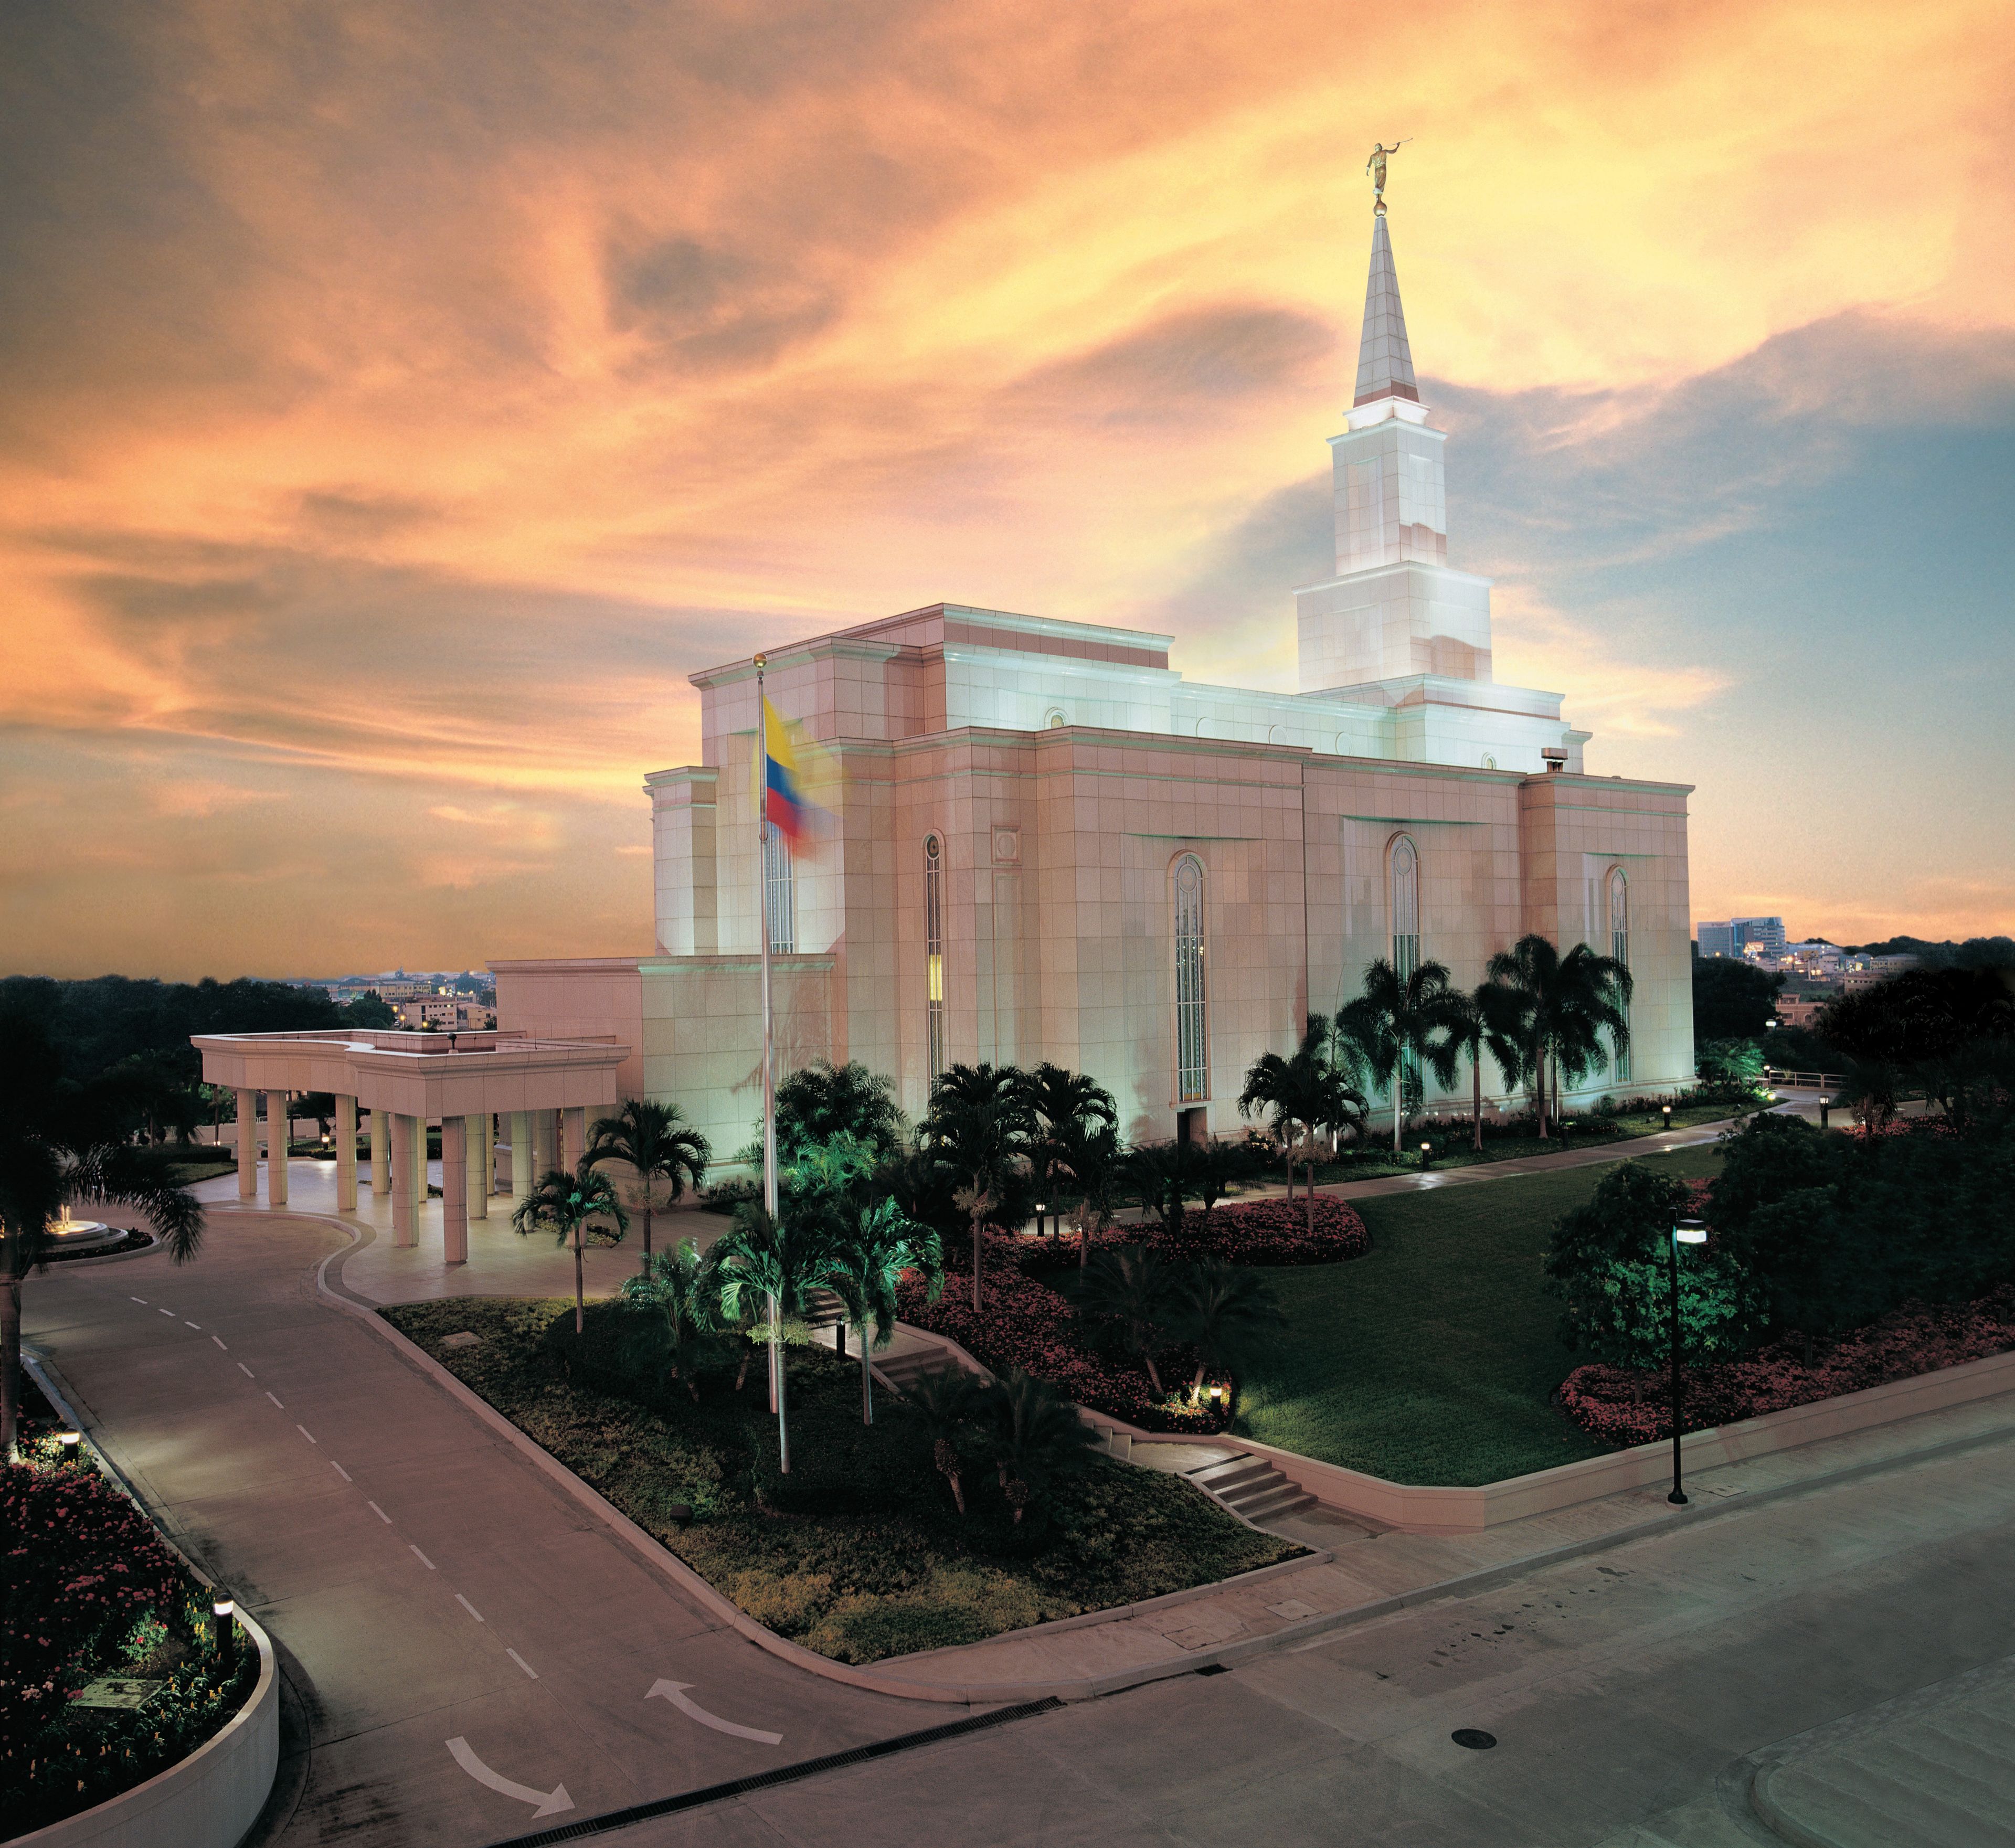 The Guayaquil Ecuador Temple and grounds at sunset.